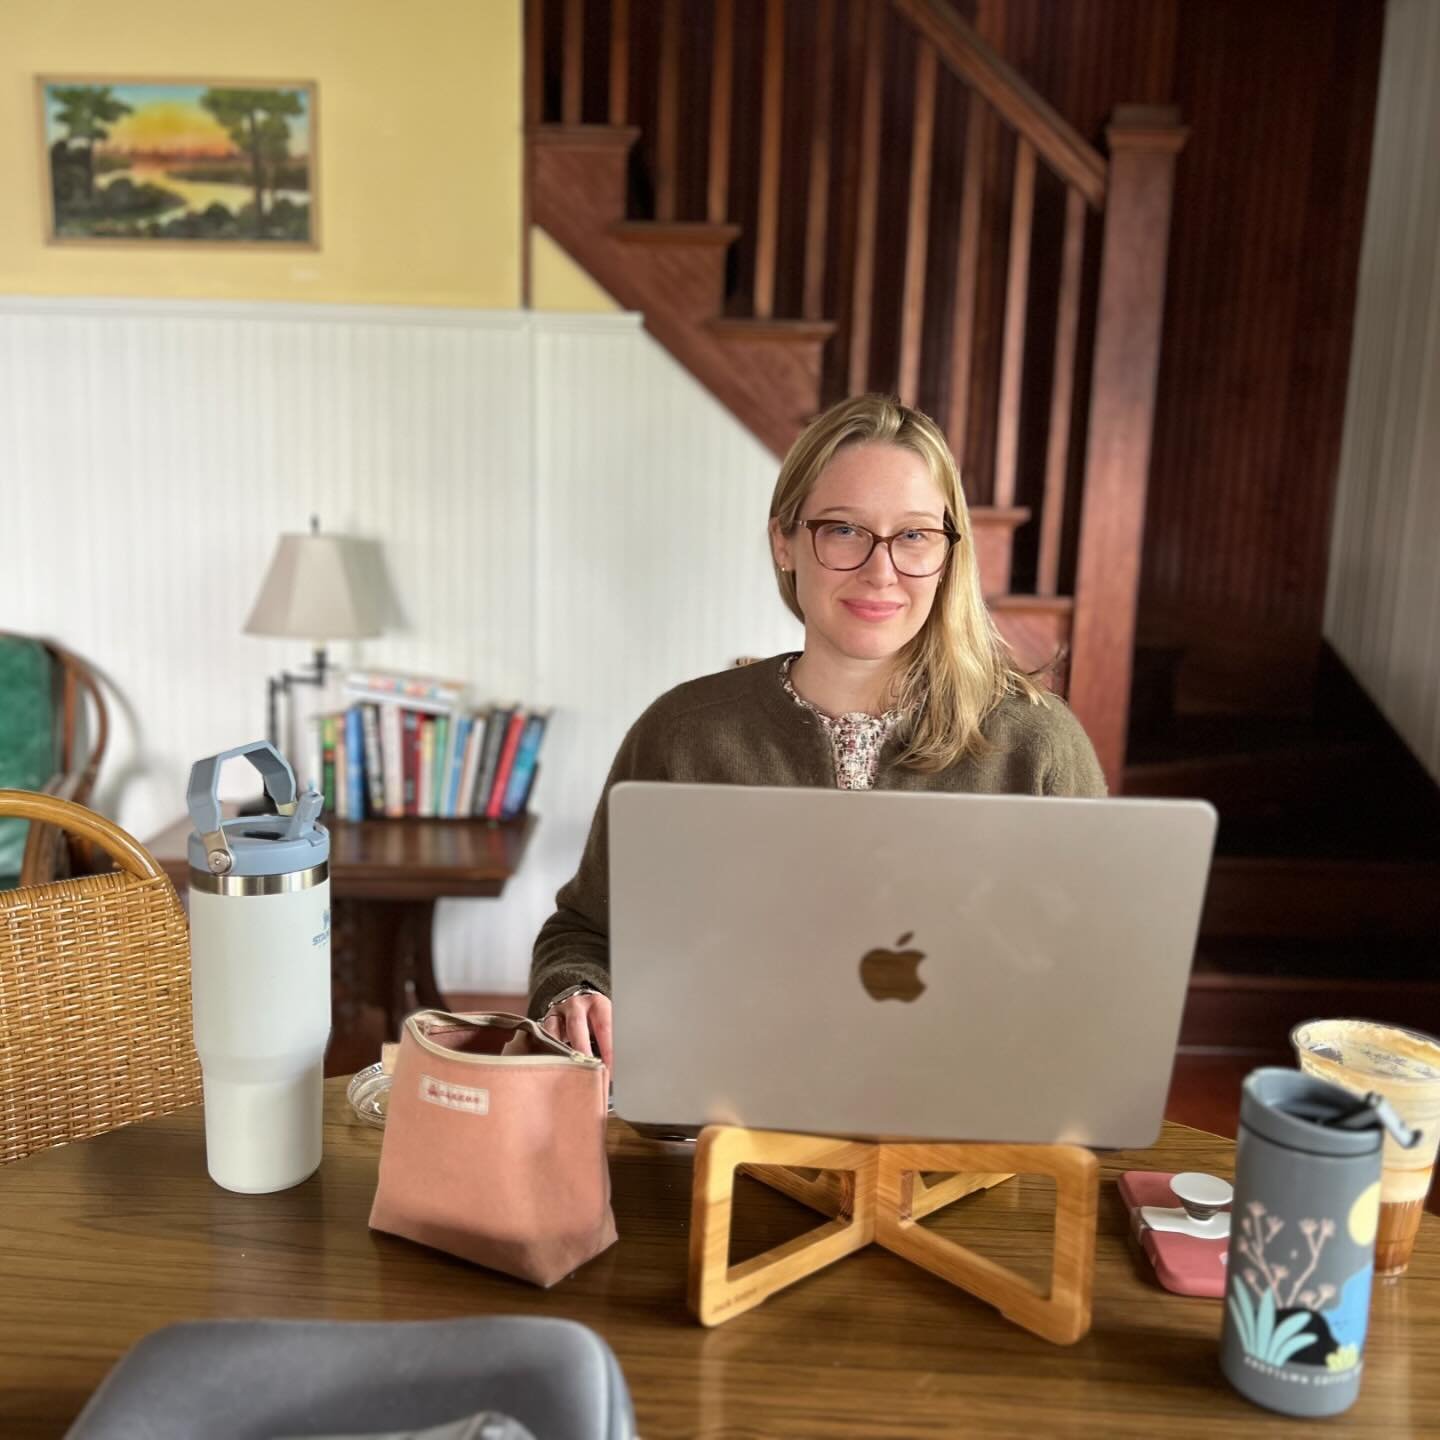 For the past few days, @rebeccamakkai &amp; I joined @christinaclancyauthor at her 1920s cabin in East Troy, WI for a spontaneous writing retreat. We each found our working spots&mdash;I at the round table in the living room, Christi on the sleeping 